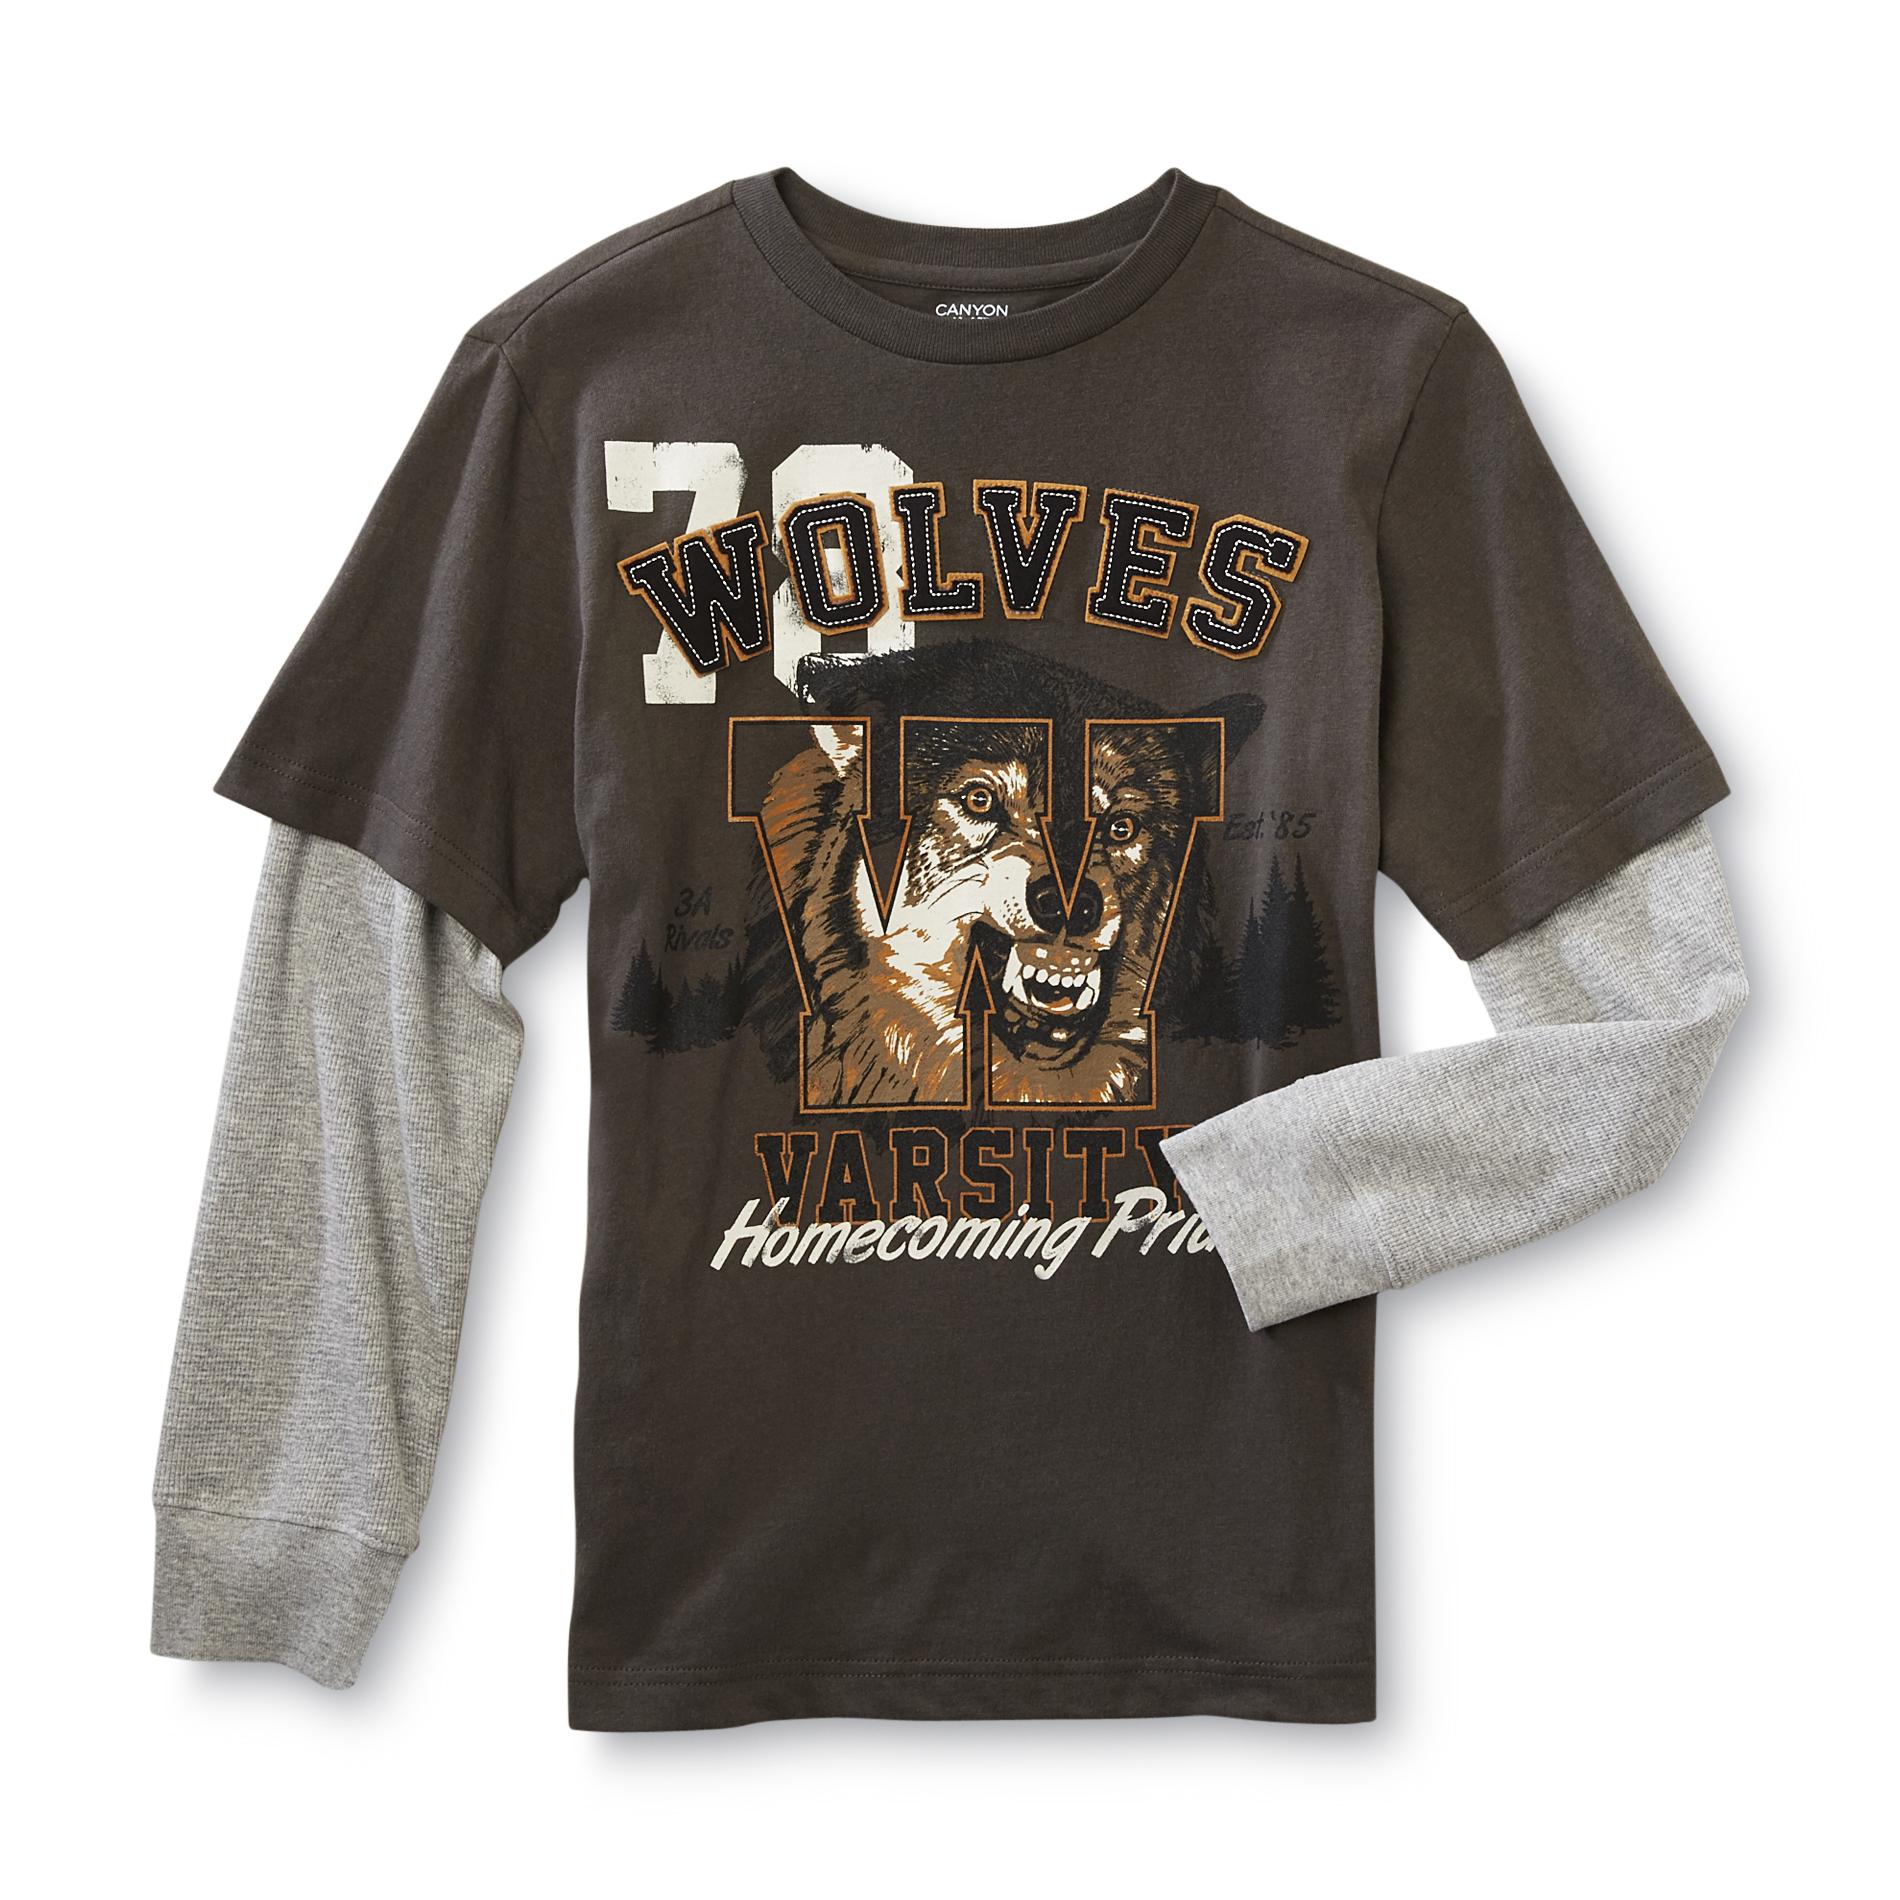 Canyon River Blues Boy's Layered Look Graphic T-Shirt - Wolves Varsity